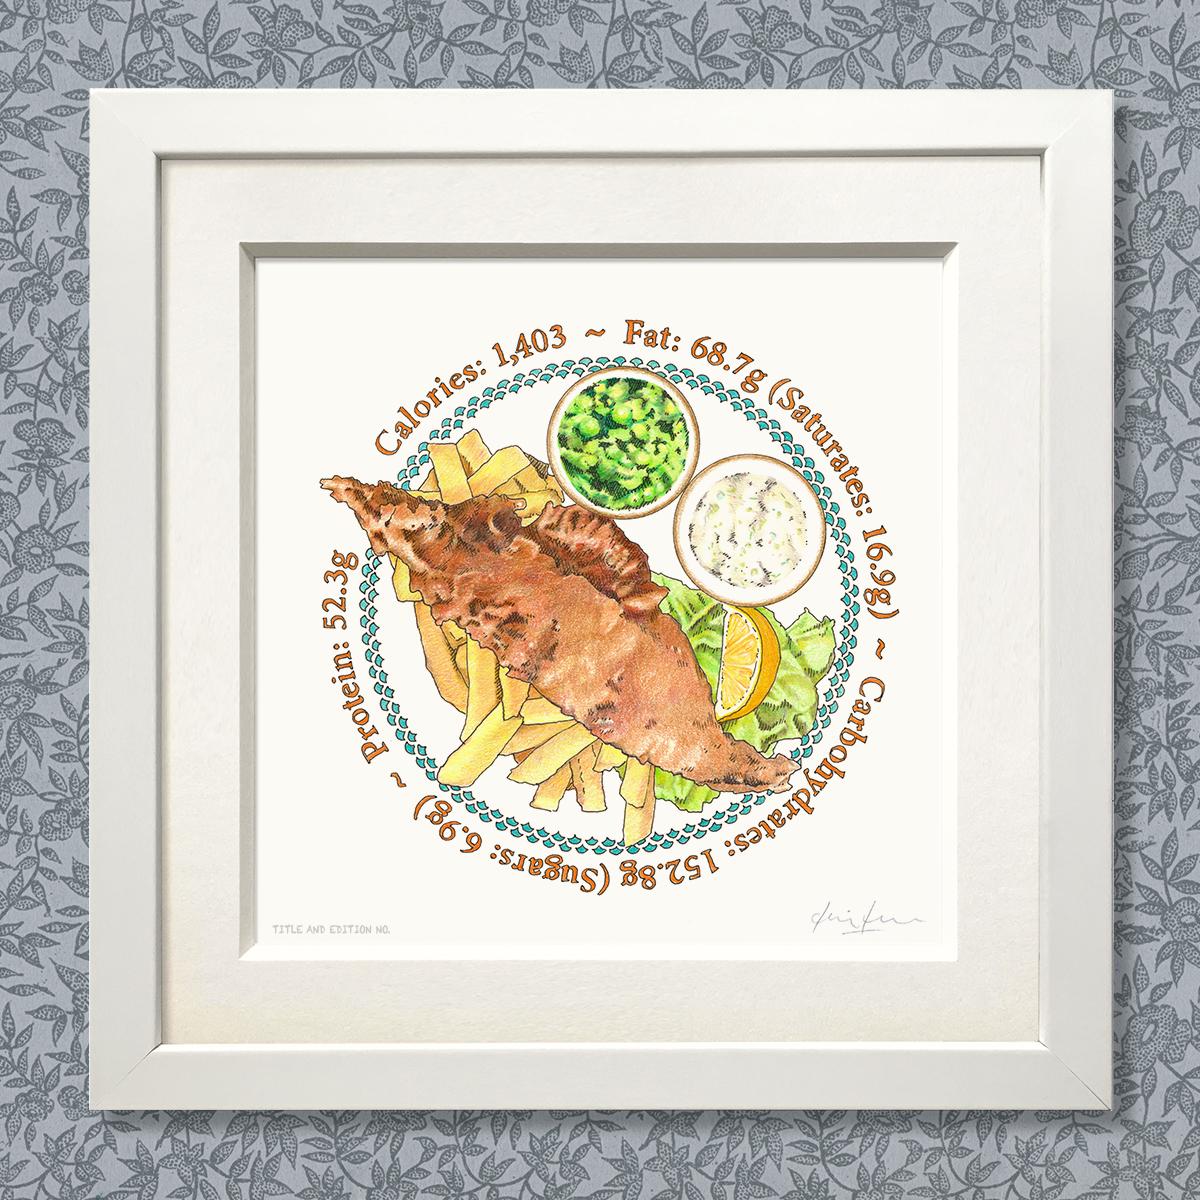 Limited edition print of a coloured drawing of a plate of fish and chips, in a white frame.